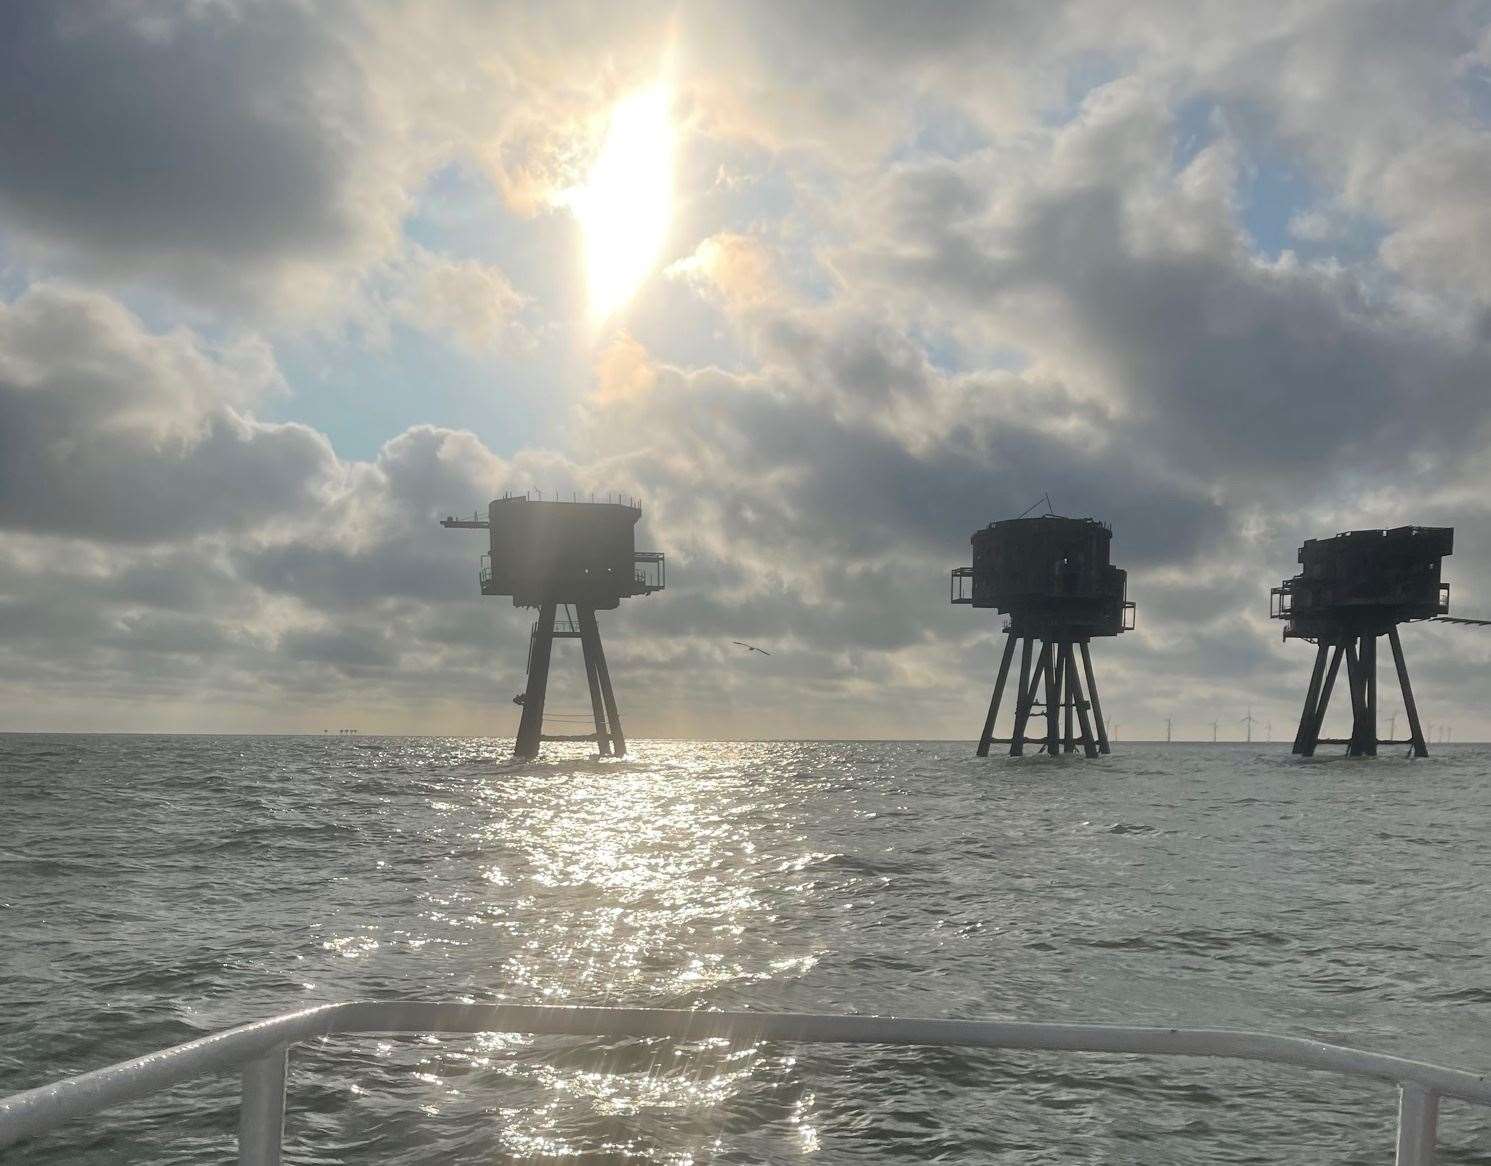 The Maunsell Forts are a series of armed towers in the Thames Estuary that operated as army and navy bases. Picture: Margaret Flo McEwan